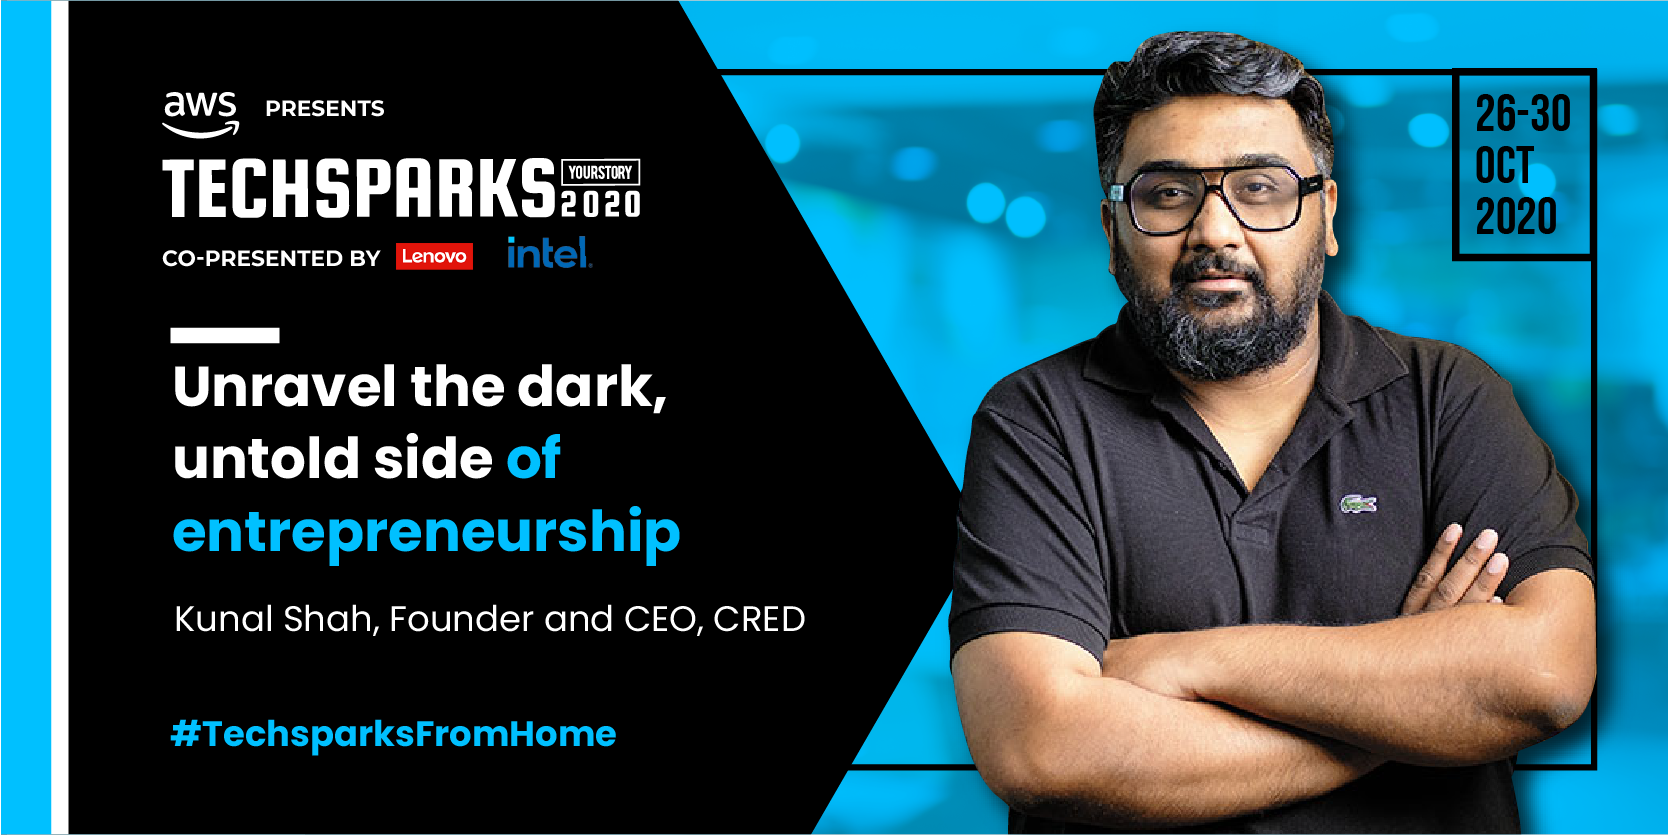 [TechSparks 2020] Remove toxicity and hate from within the system: Kunal Shah on the dark side of entrepreneurship 